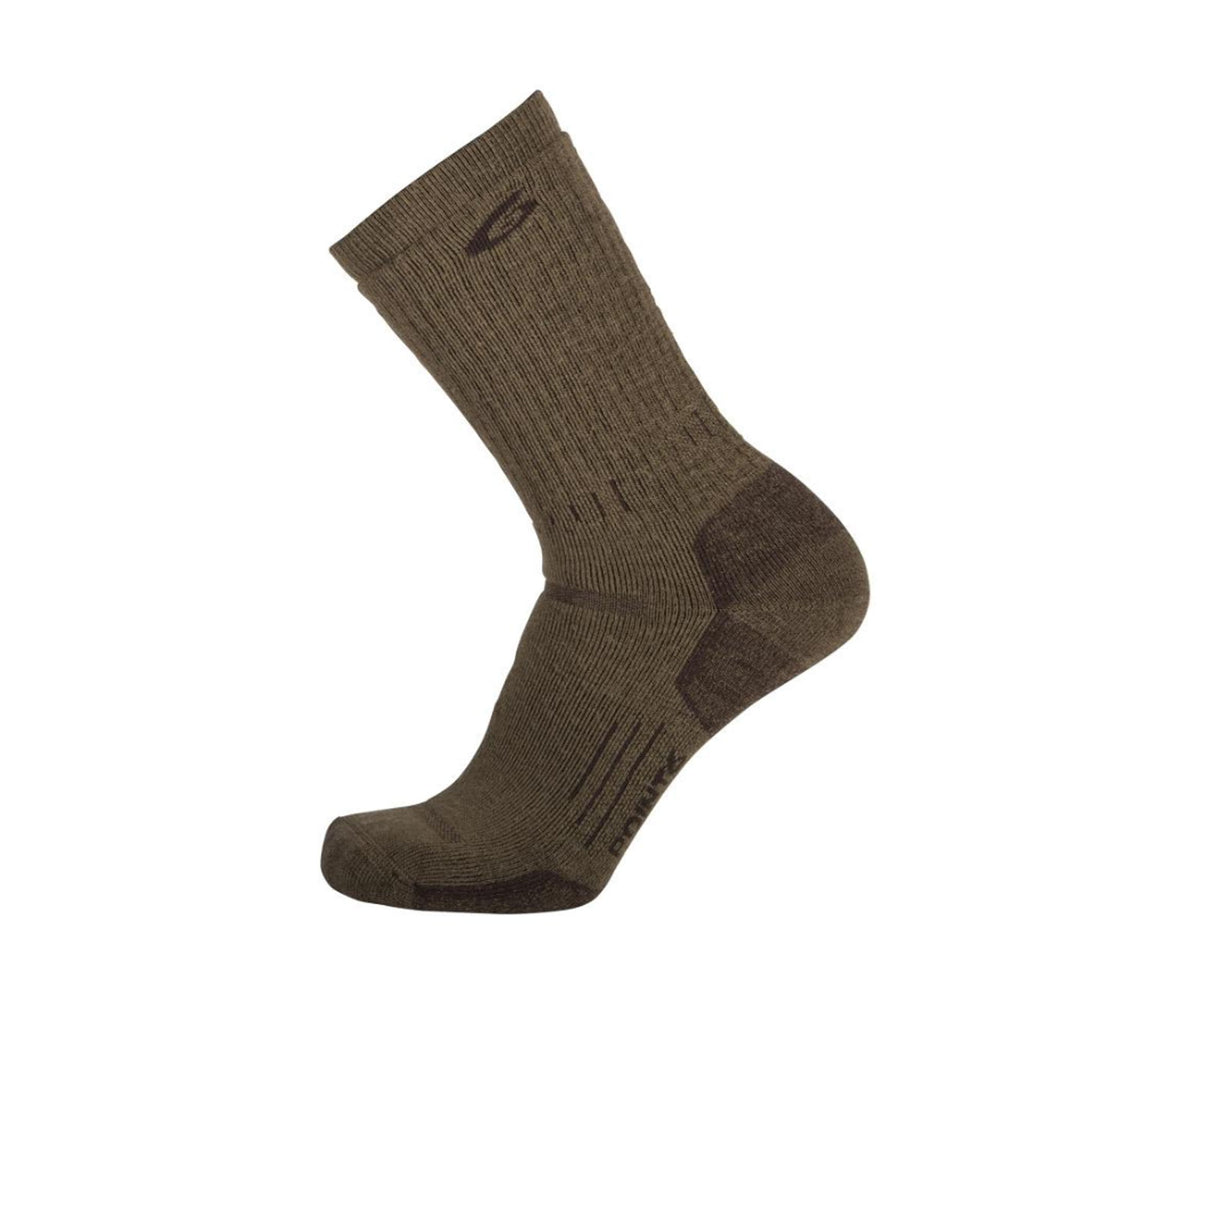 Point6 Tactical Defender Mid (Men) - Coyote Brown Accessories - Socks - Performance - The Heel Shoe Fitters